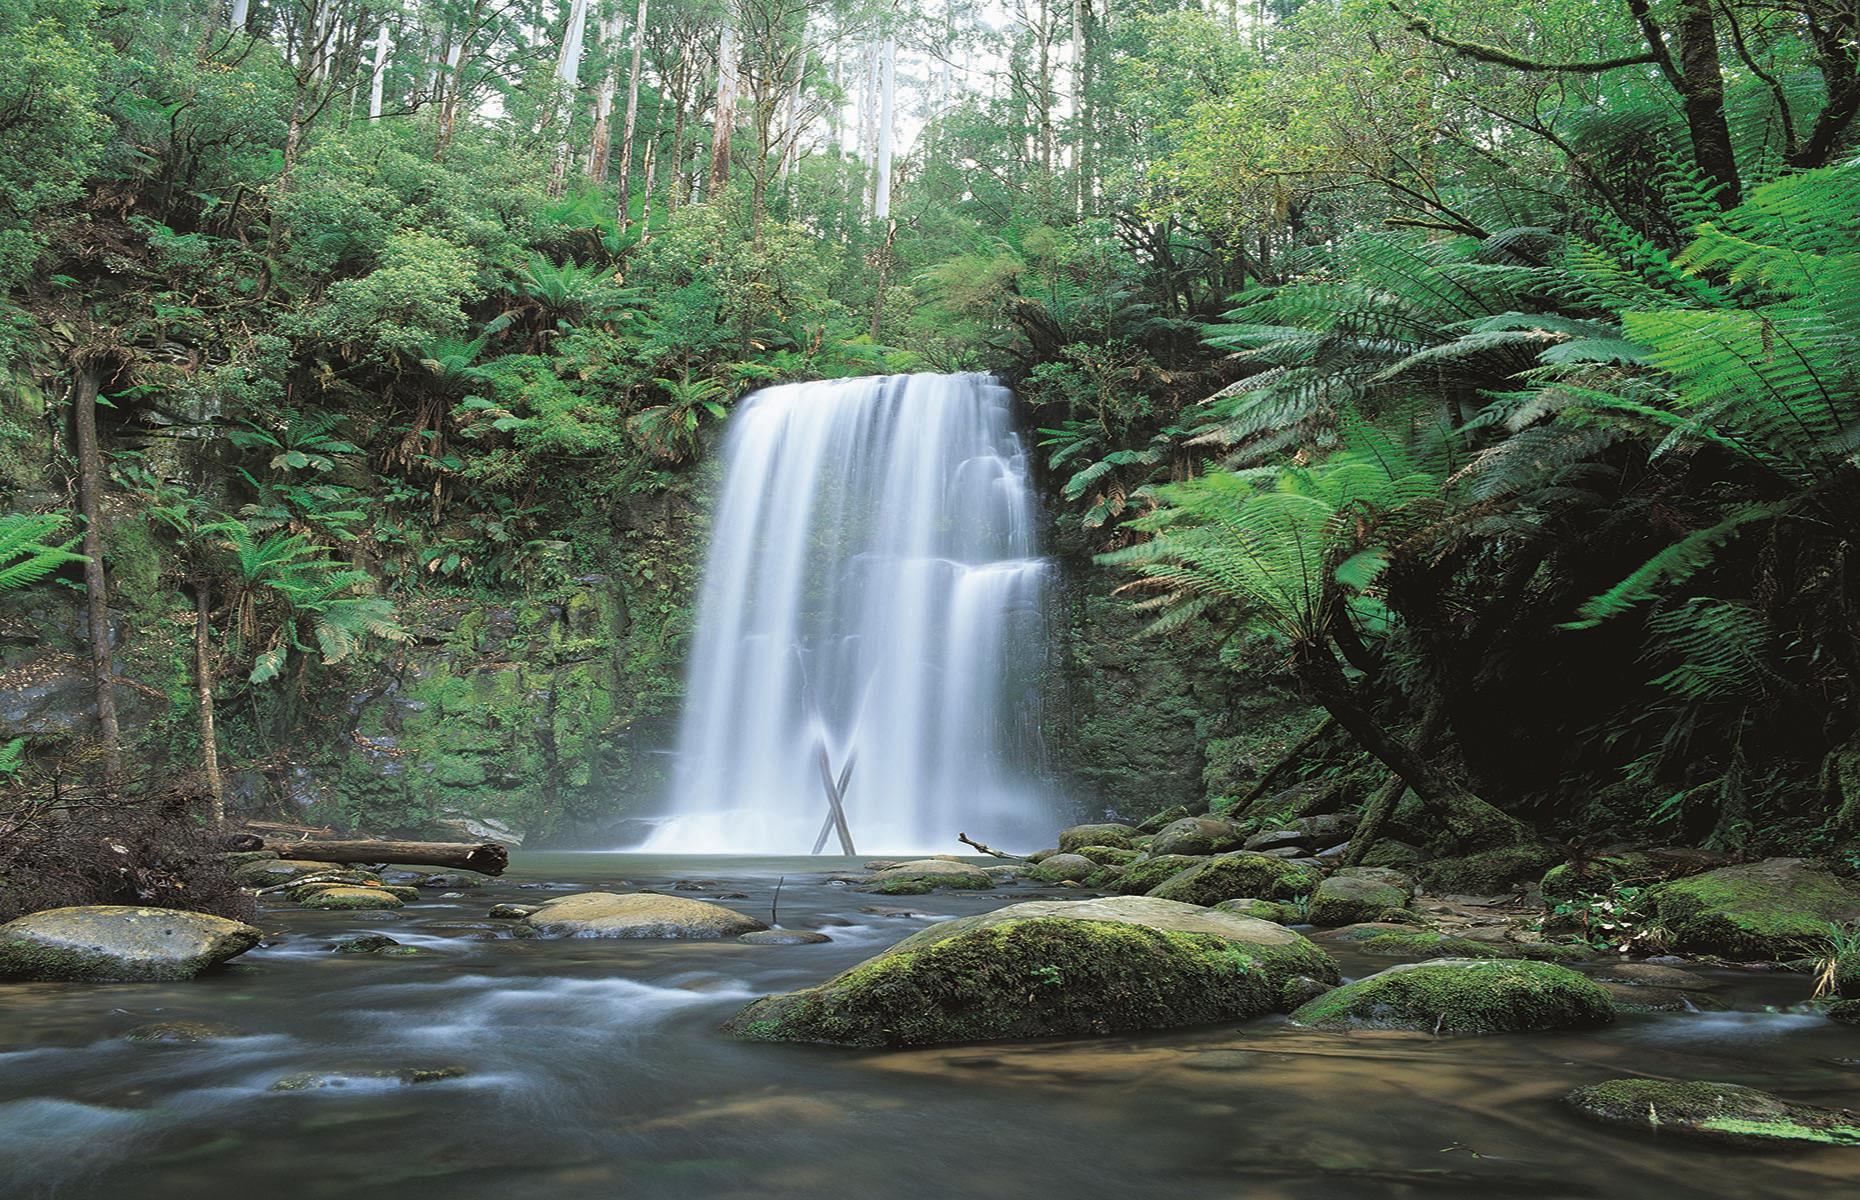 <p>It's not all about the coastline. With its gigantic ferns, towering trees and cascading waterfalls, Great Otway National Park is an enchanting place to explore on the drive. Here you’ll find koalas, wallabies and even glow worms at Melba Gully, a lush temperate rainforest.</p>  <p>If you’re up for a steep but rewarding hike, walk the 1.8 miles (3km) to Beauchamp Falls, a lesser-known 65-foot (20m) watery drop that's tucked away in the forest. </p>